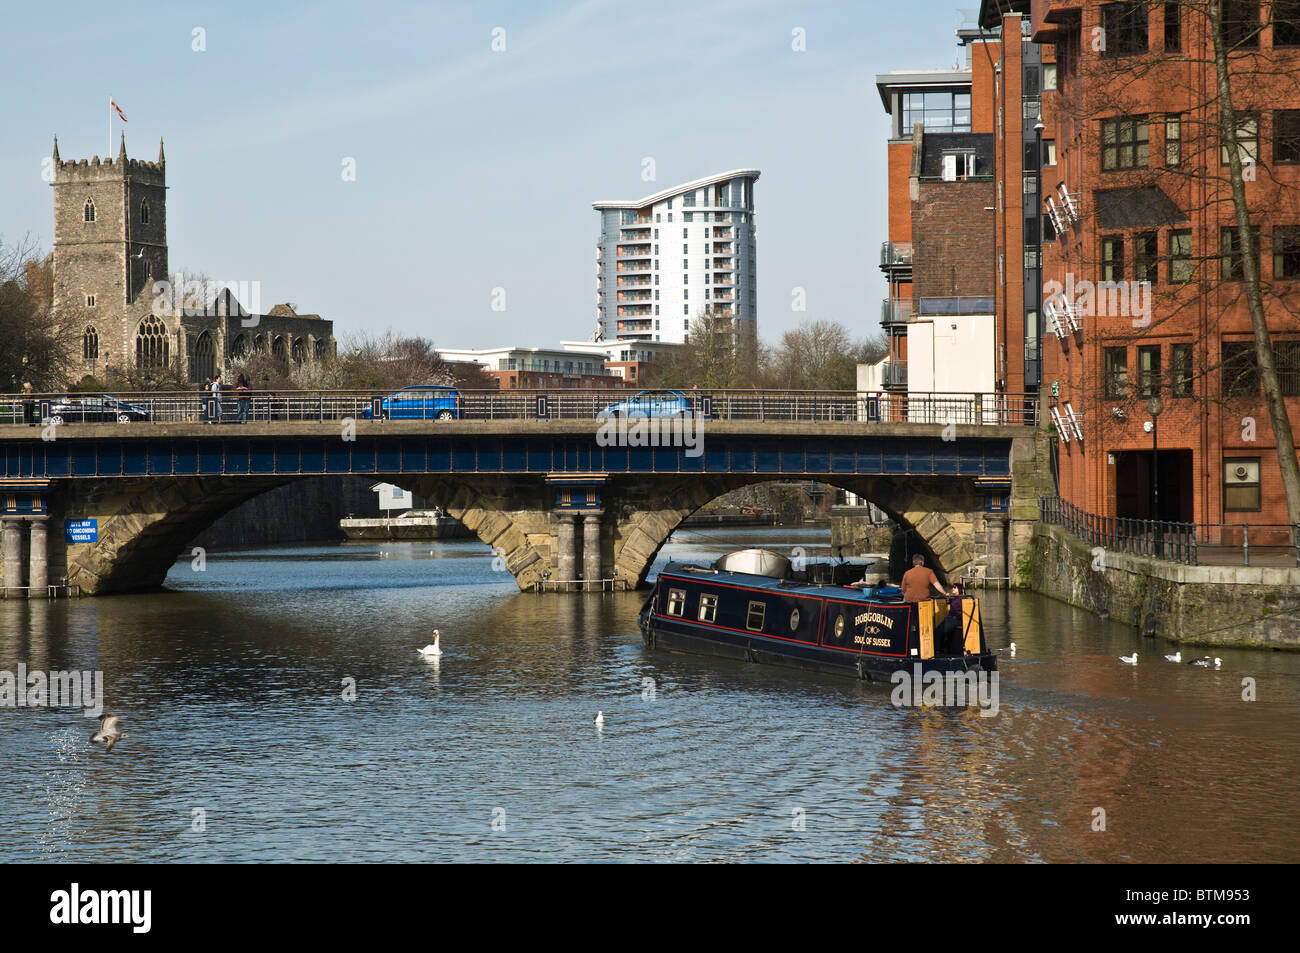 dh Floating Harbour CITY BRISTOL Narrowboat Barge Bridge Waterfront Canal Boot England River Canals uk Stockfoto